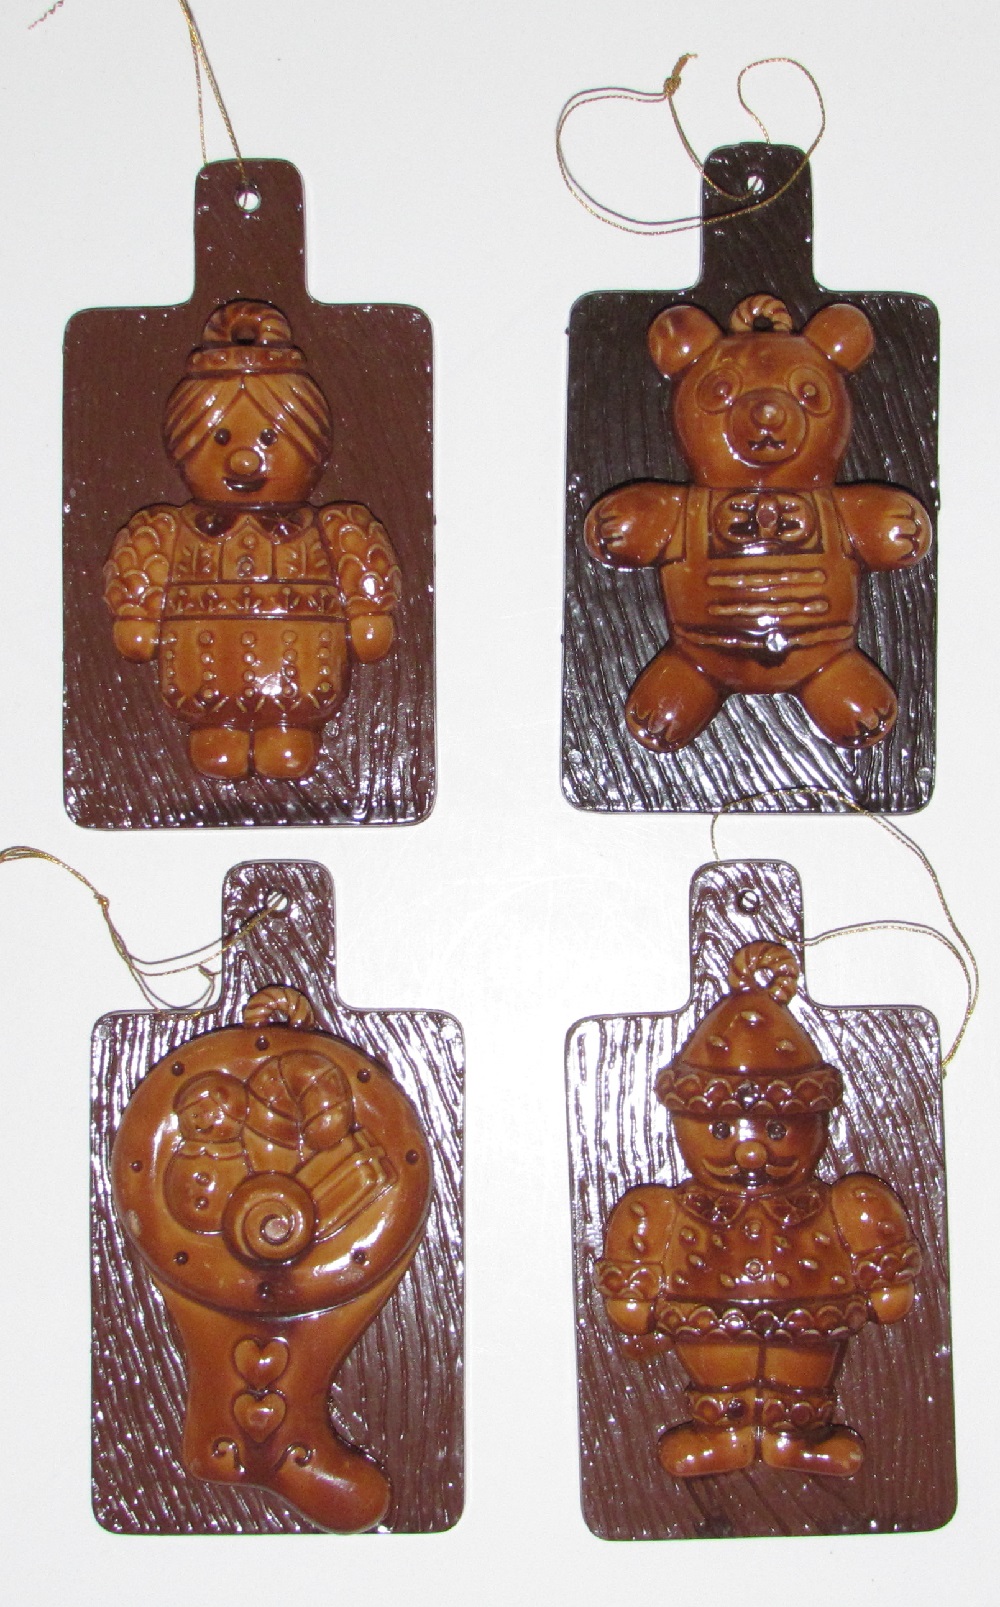 Gingerbread Figures - Plastic - 4 inch - assorted - 4 styles.